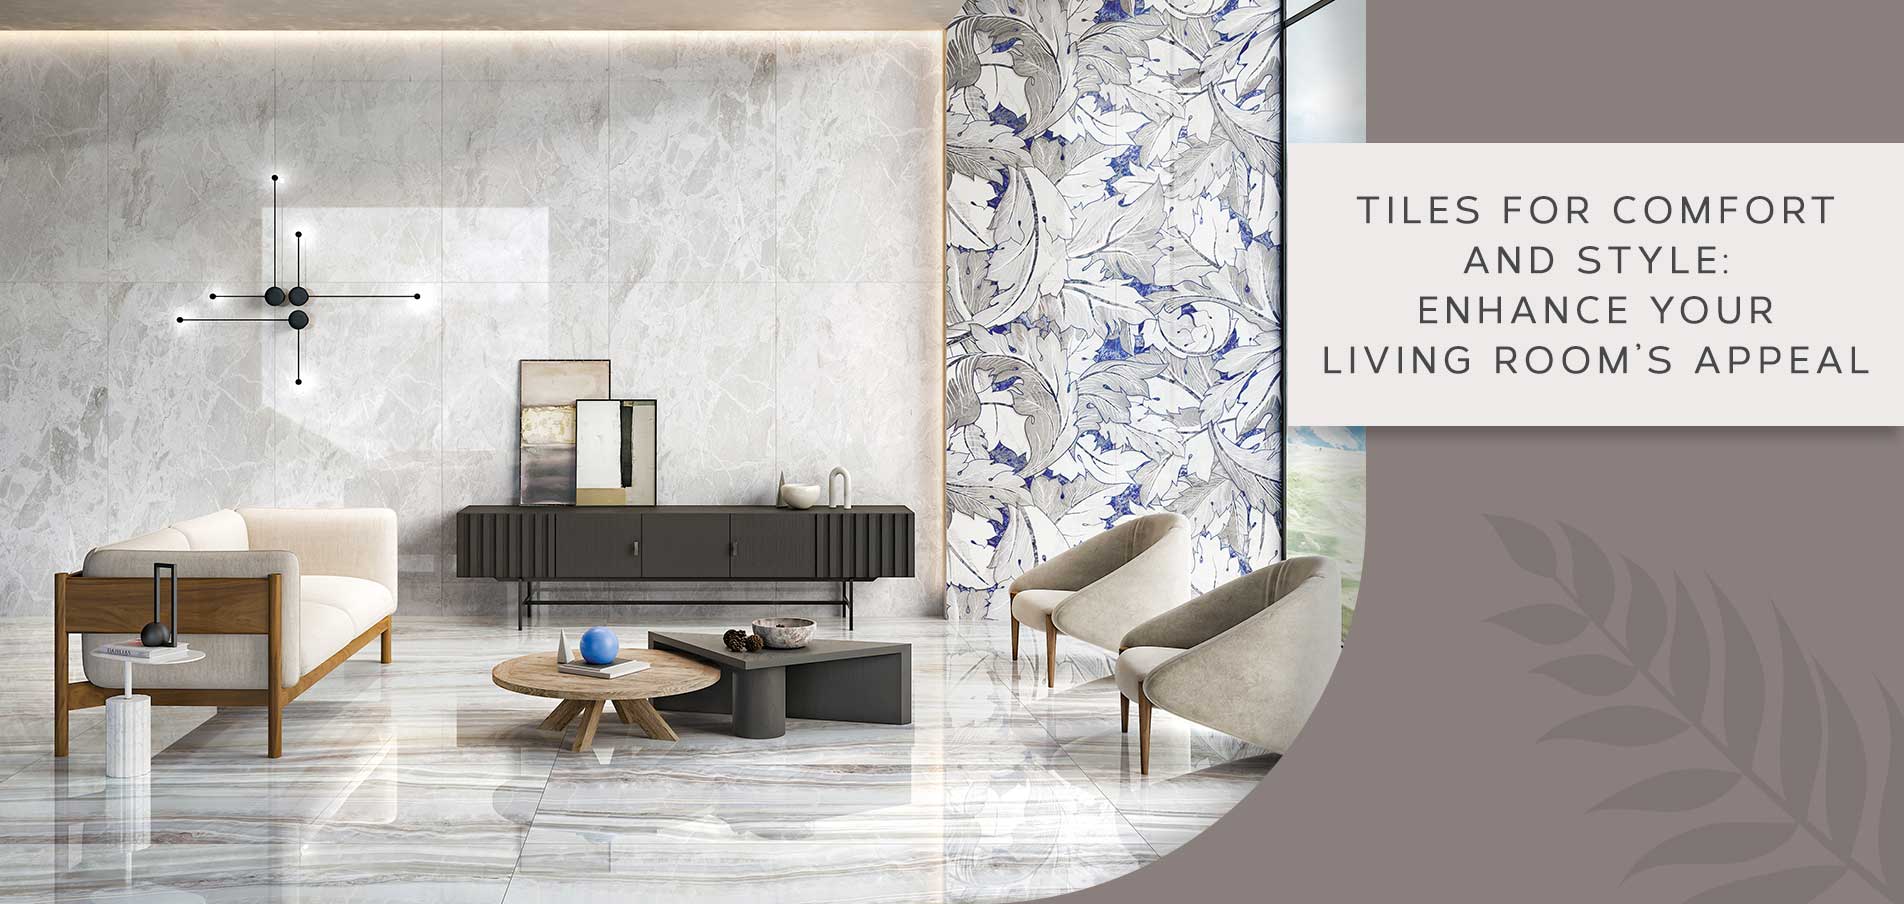 Tiles for Comfort and Style: Enhance Your Living Rooms Appeal